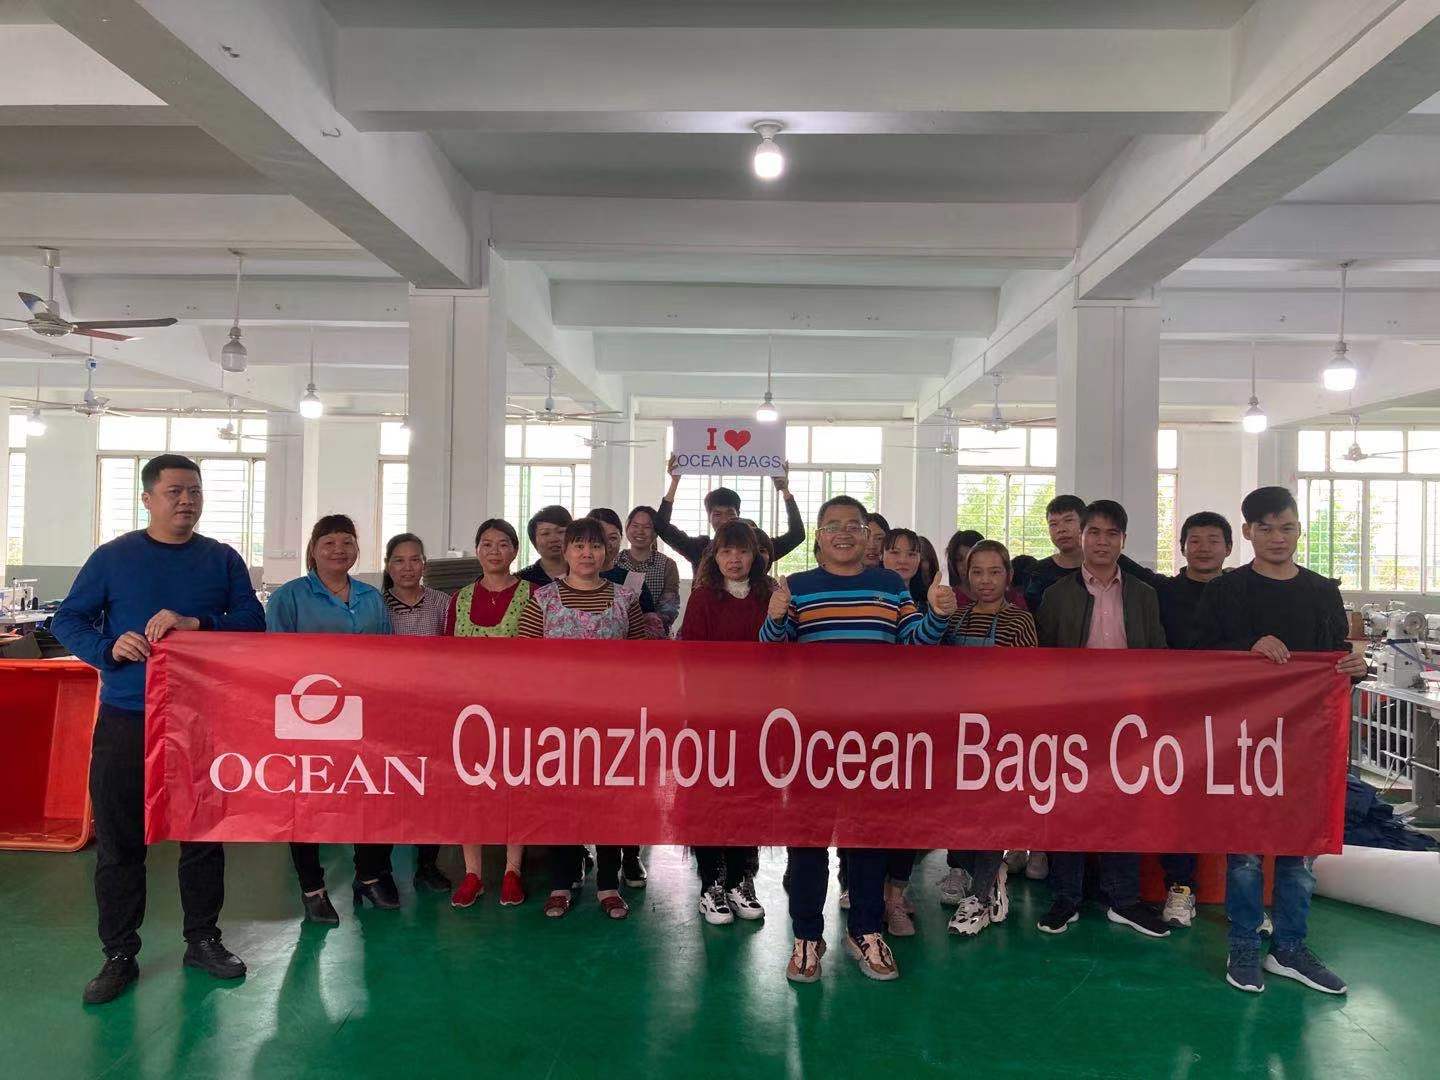 Quanzhou Ocean bags team are ready for you at any time.